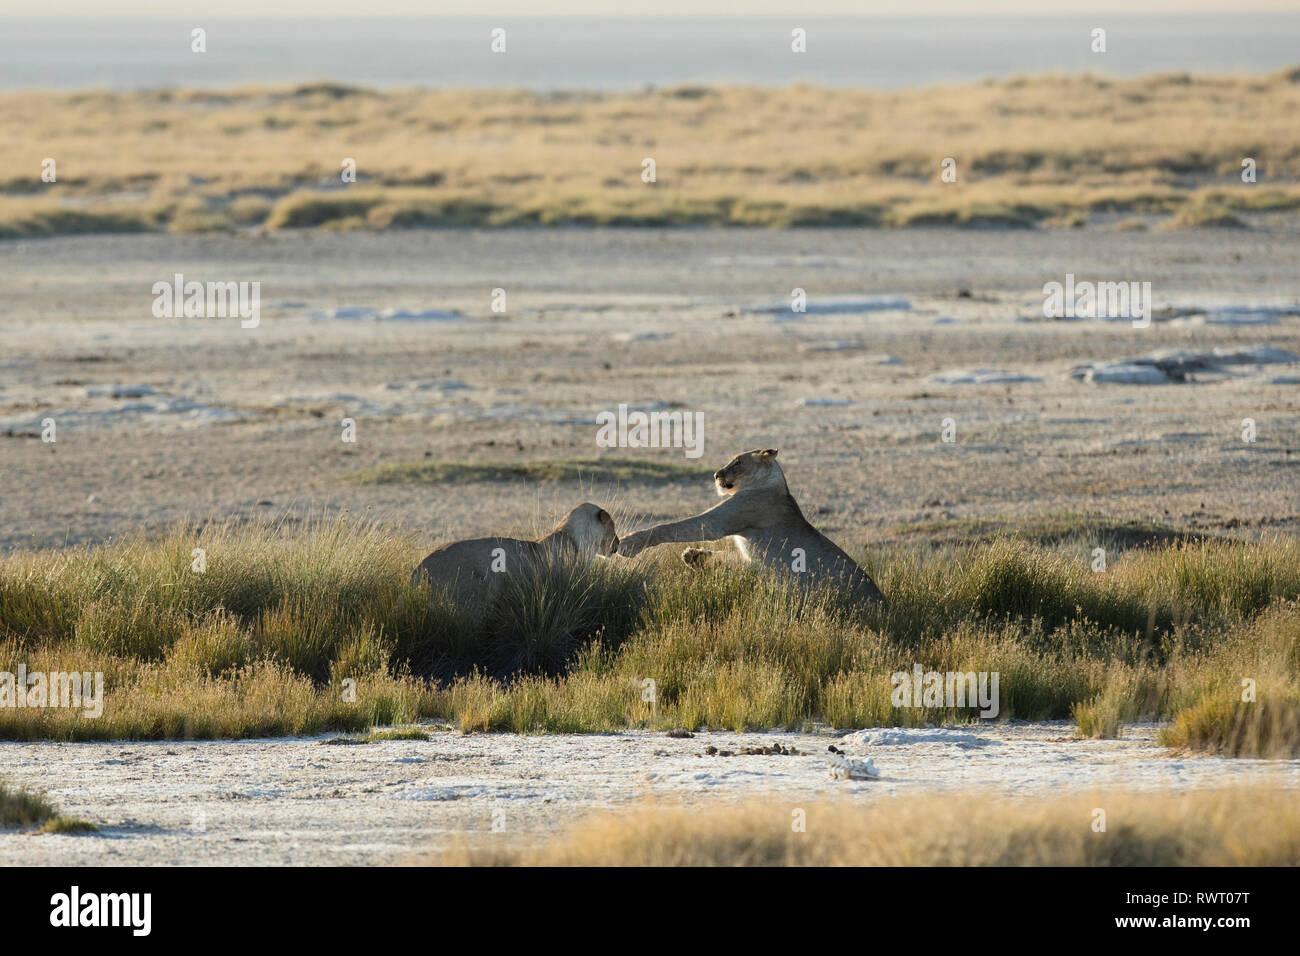 Two lions play in the harsh morning light at a water hole in Etosha National Park, Namibia. Stock Photo